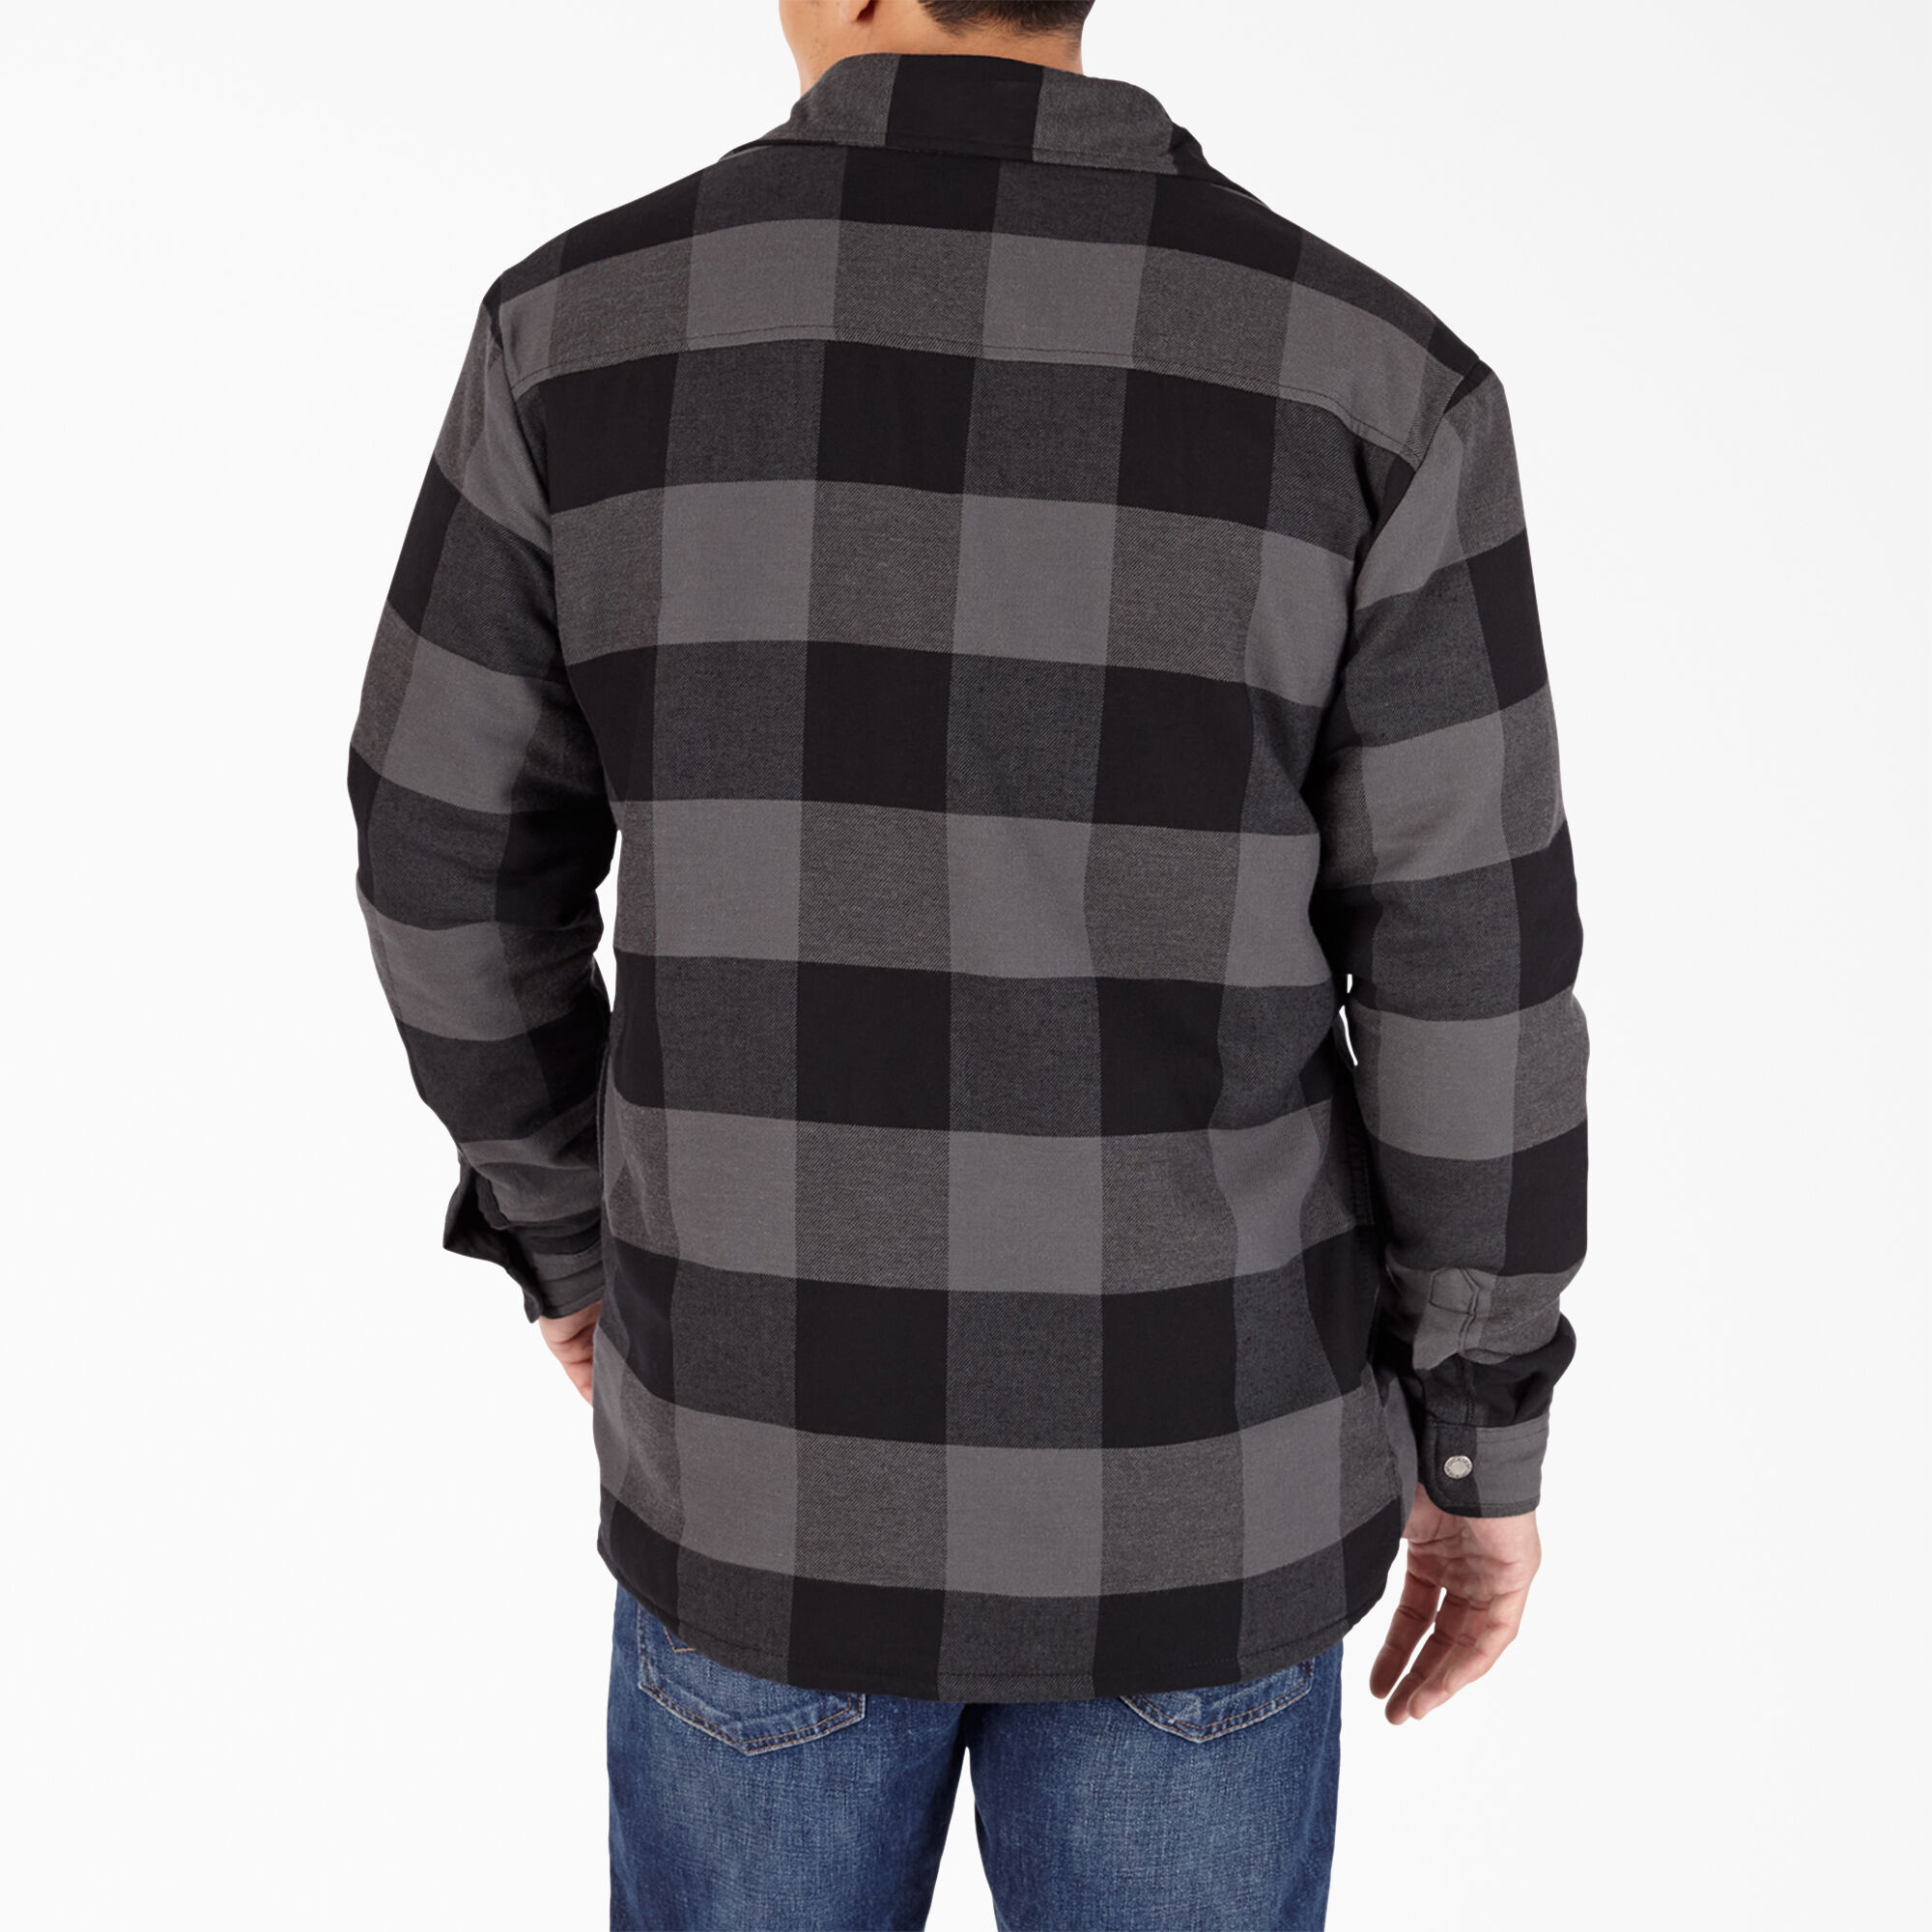 Sherpa Lined Flannel Shirt Jacket with DWR | Mens Shirt Jackets